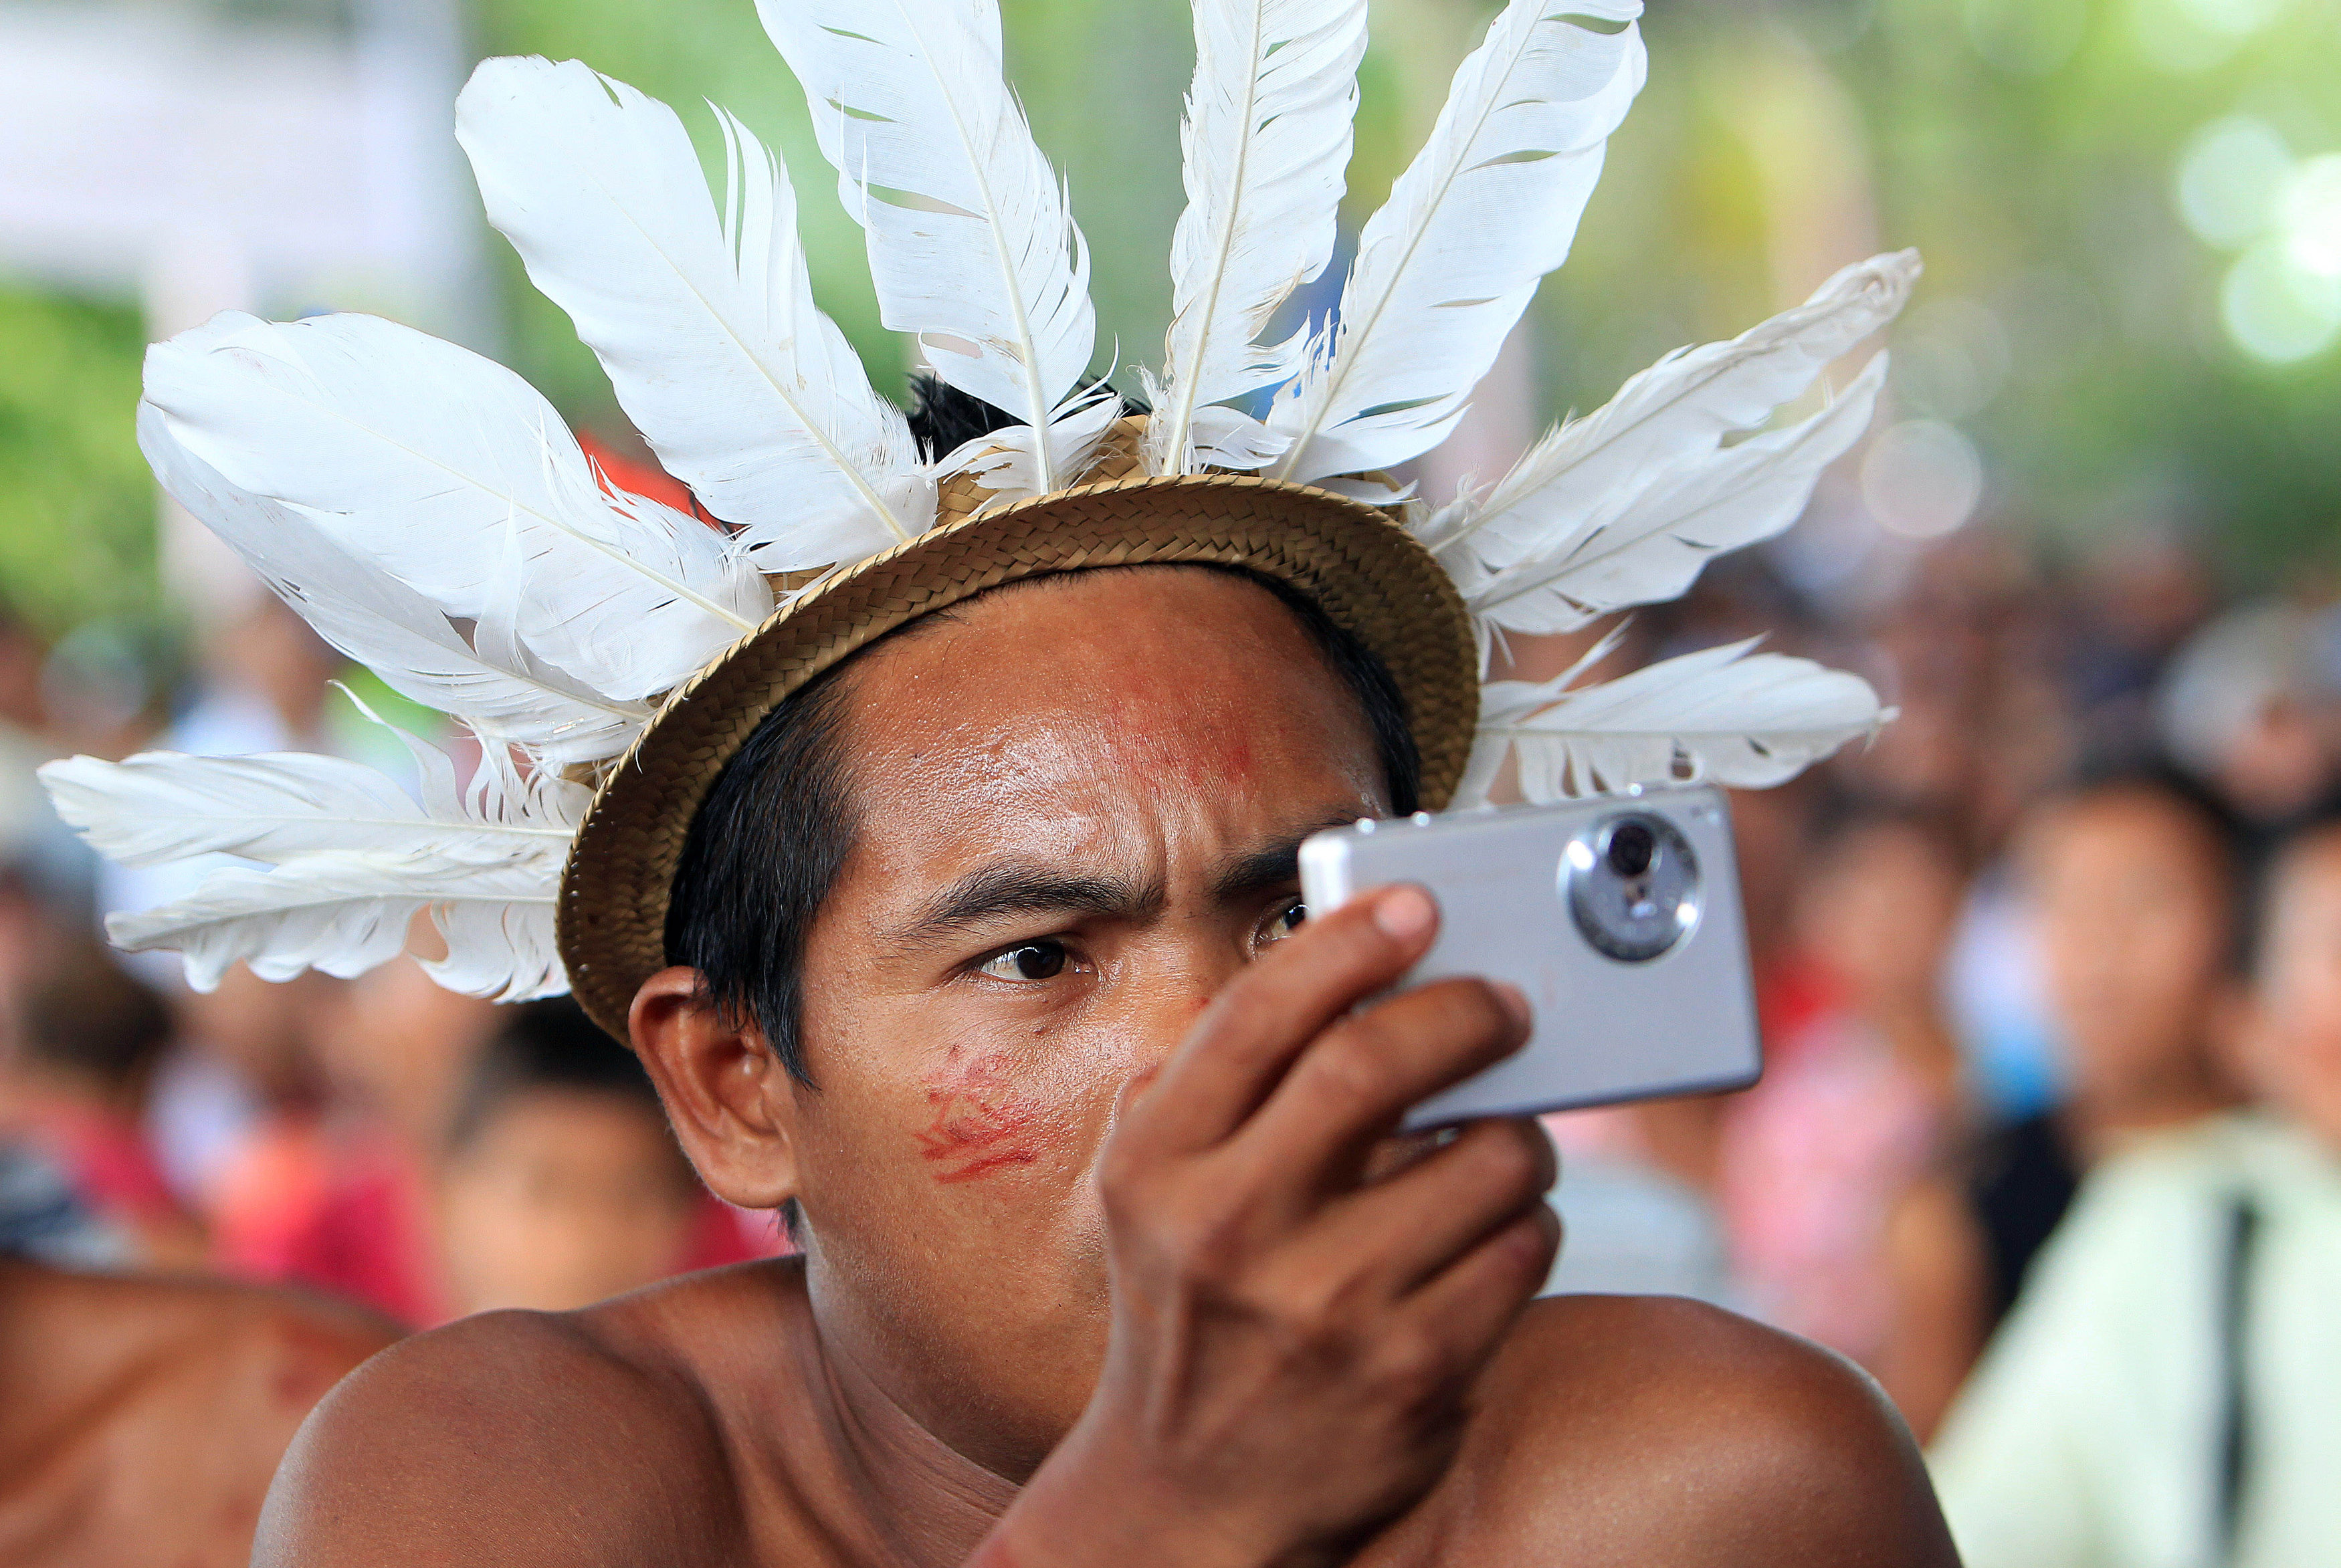 An Amerindian takes pix of the Pope in Peru